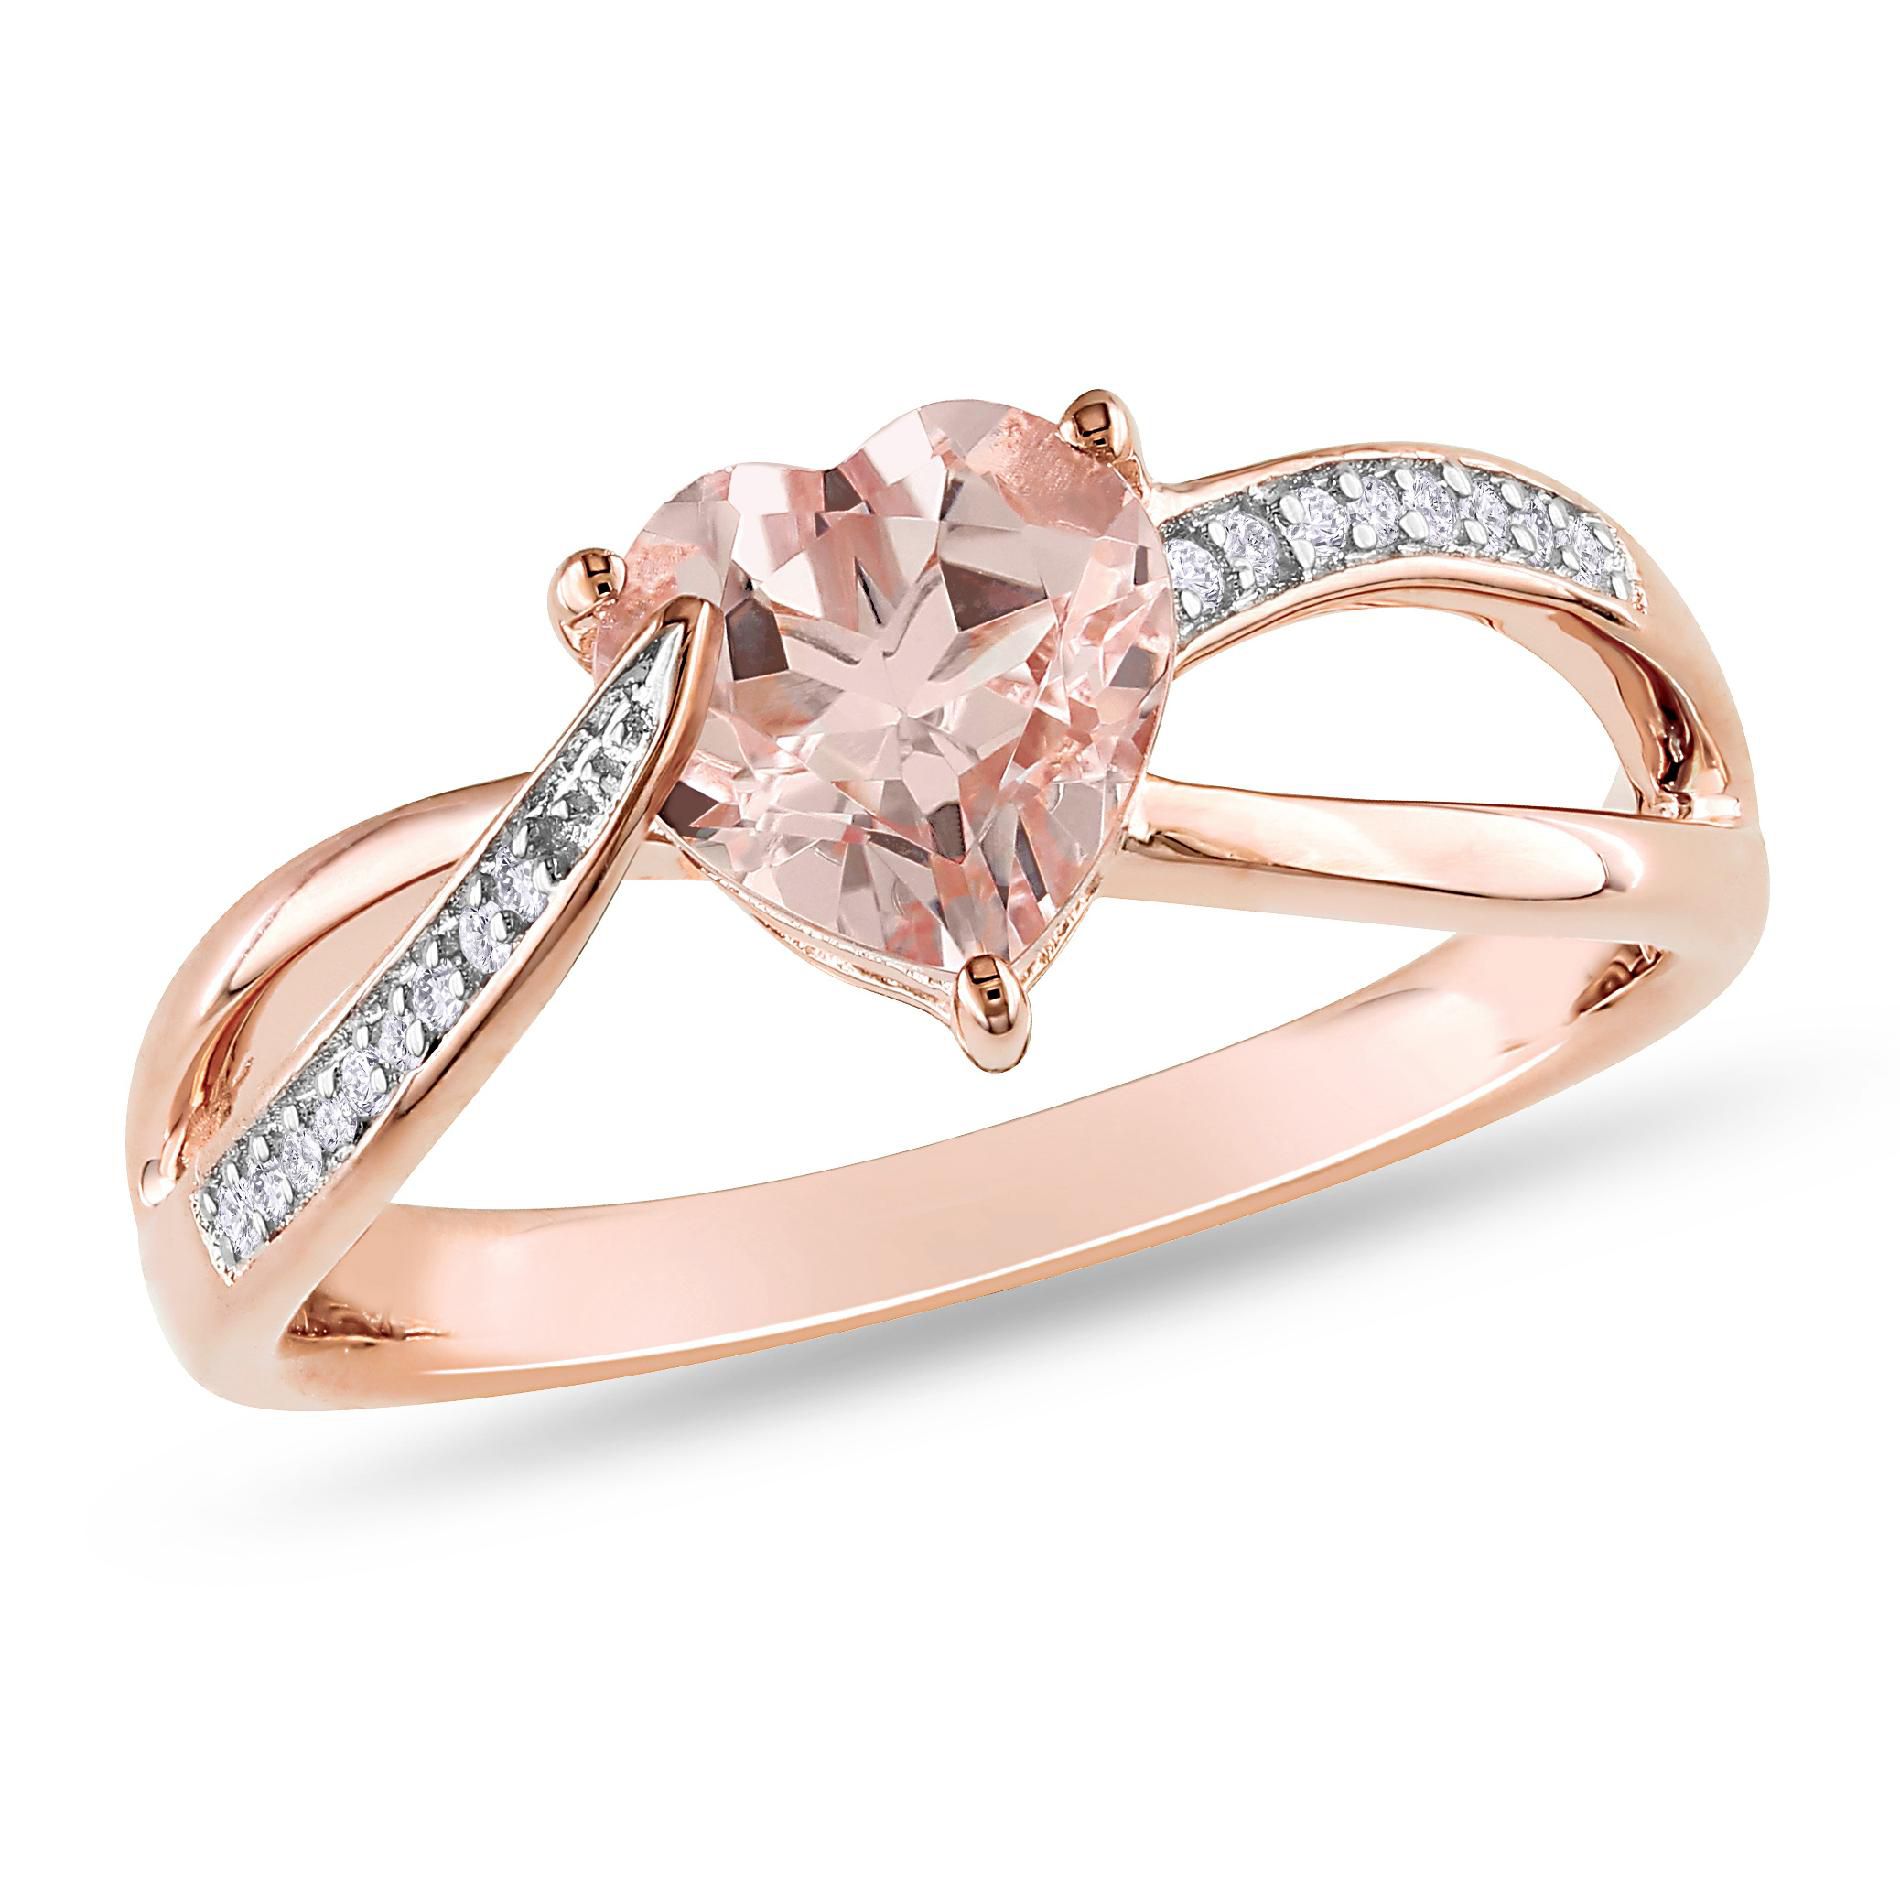 0.05 CT  Diamond And 1 1/10 CT Morganite Rose Plated Sterling Silver Ring (GH, I2-I3)